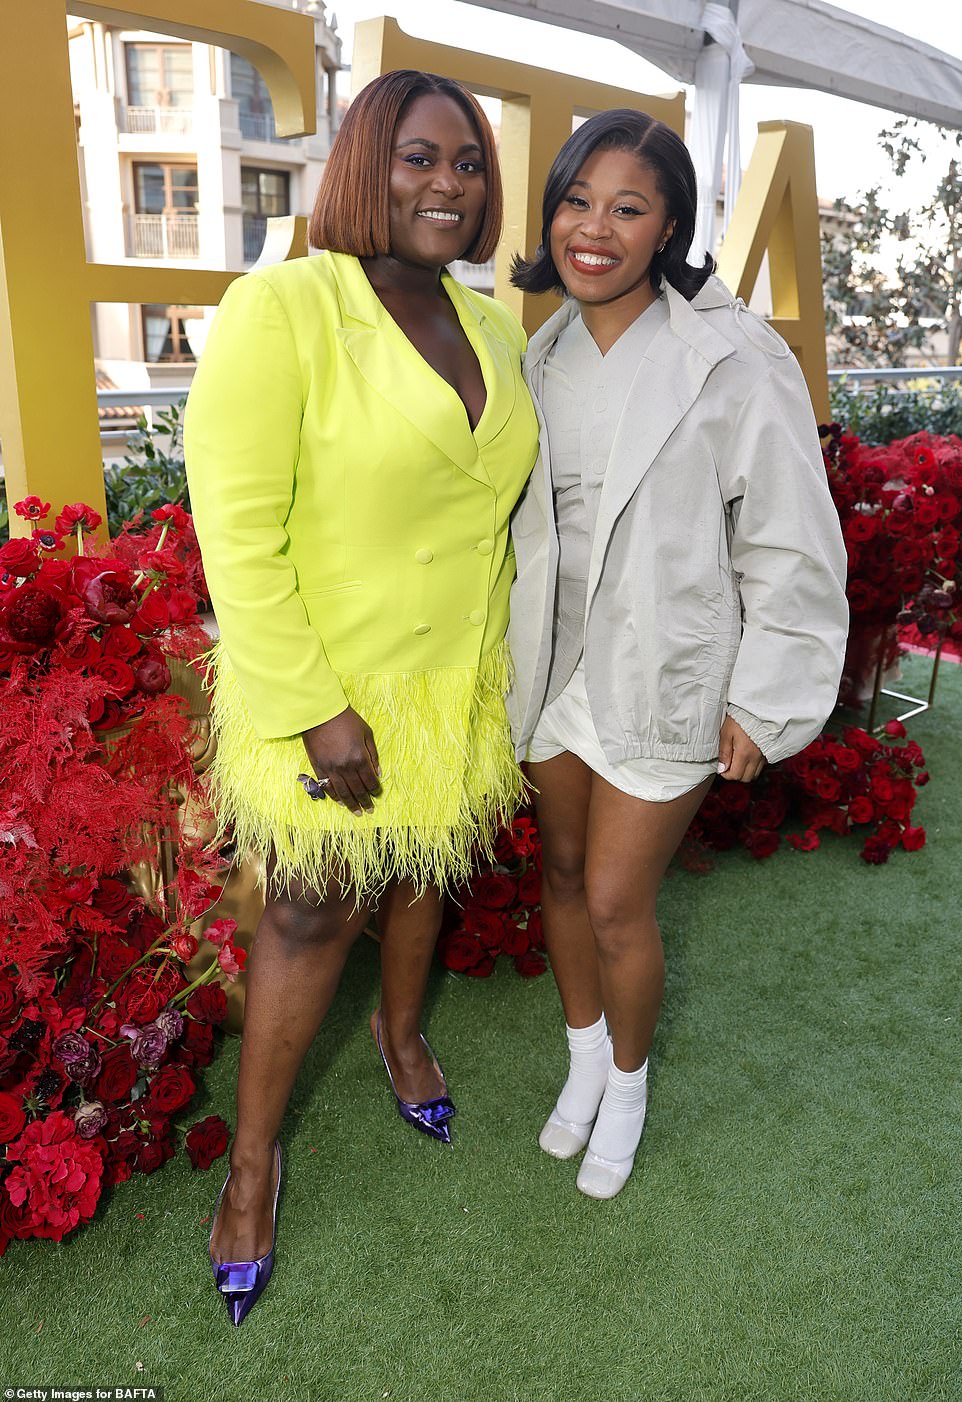 Danielle Brooks stunned in a yellow blazer dress with feathery details while Dominique Fishback also put on a fashionable display